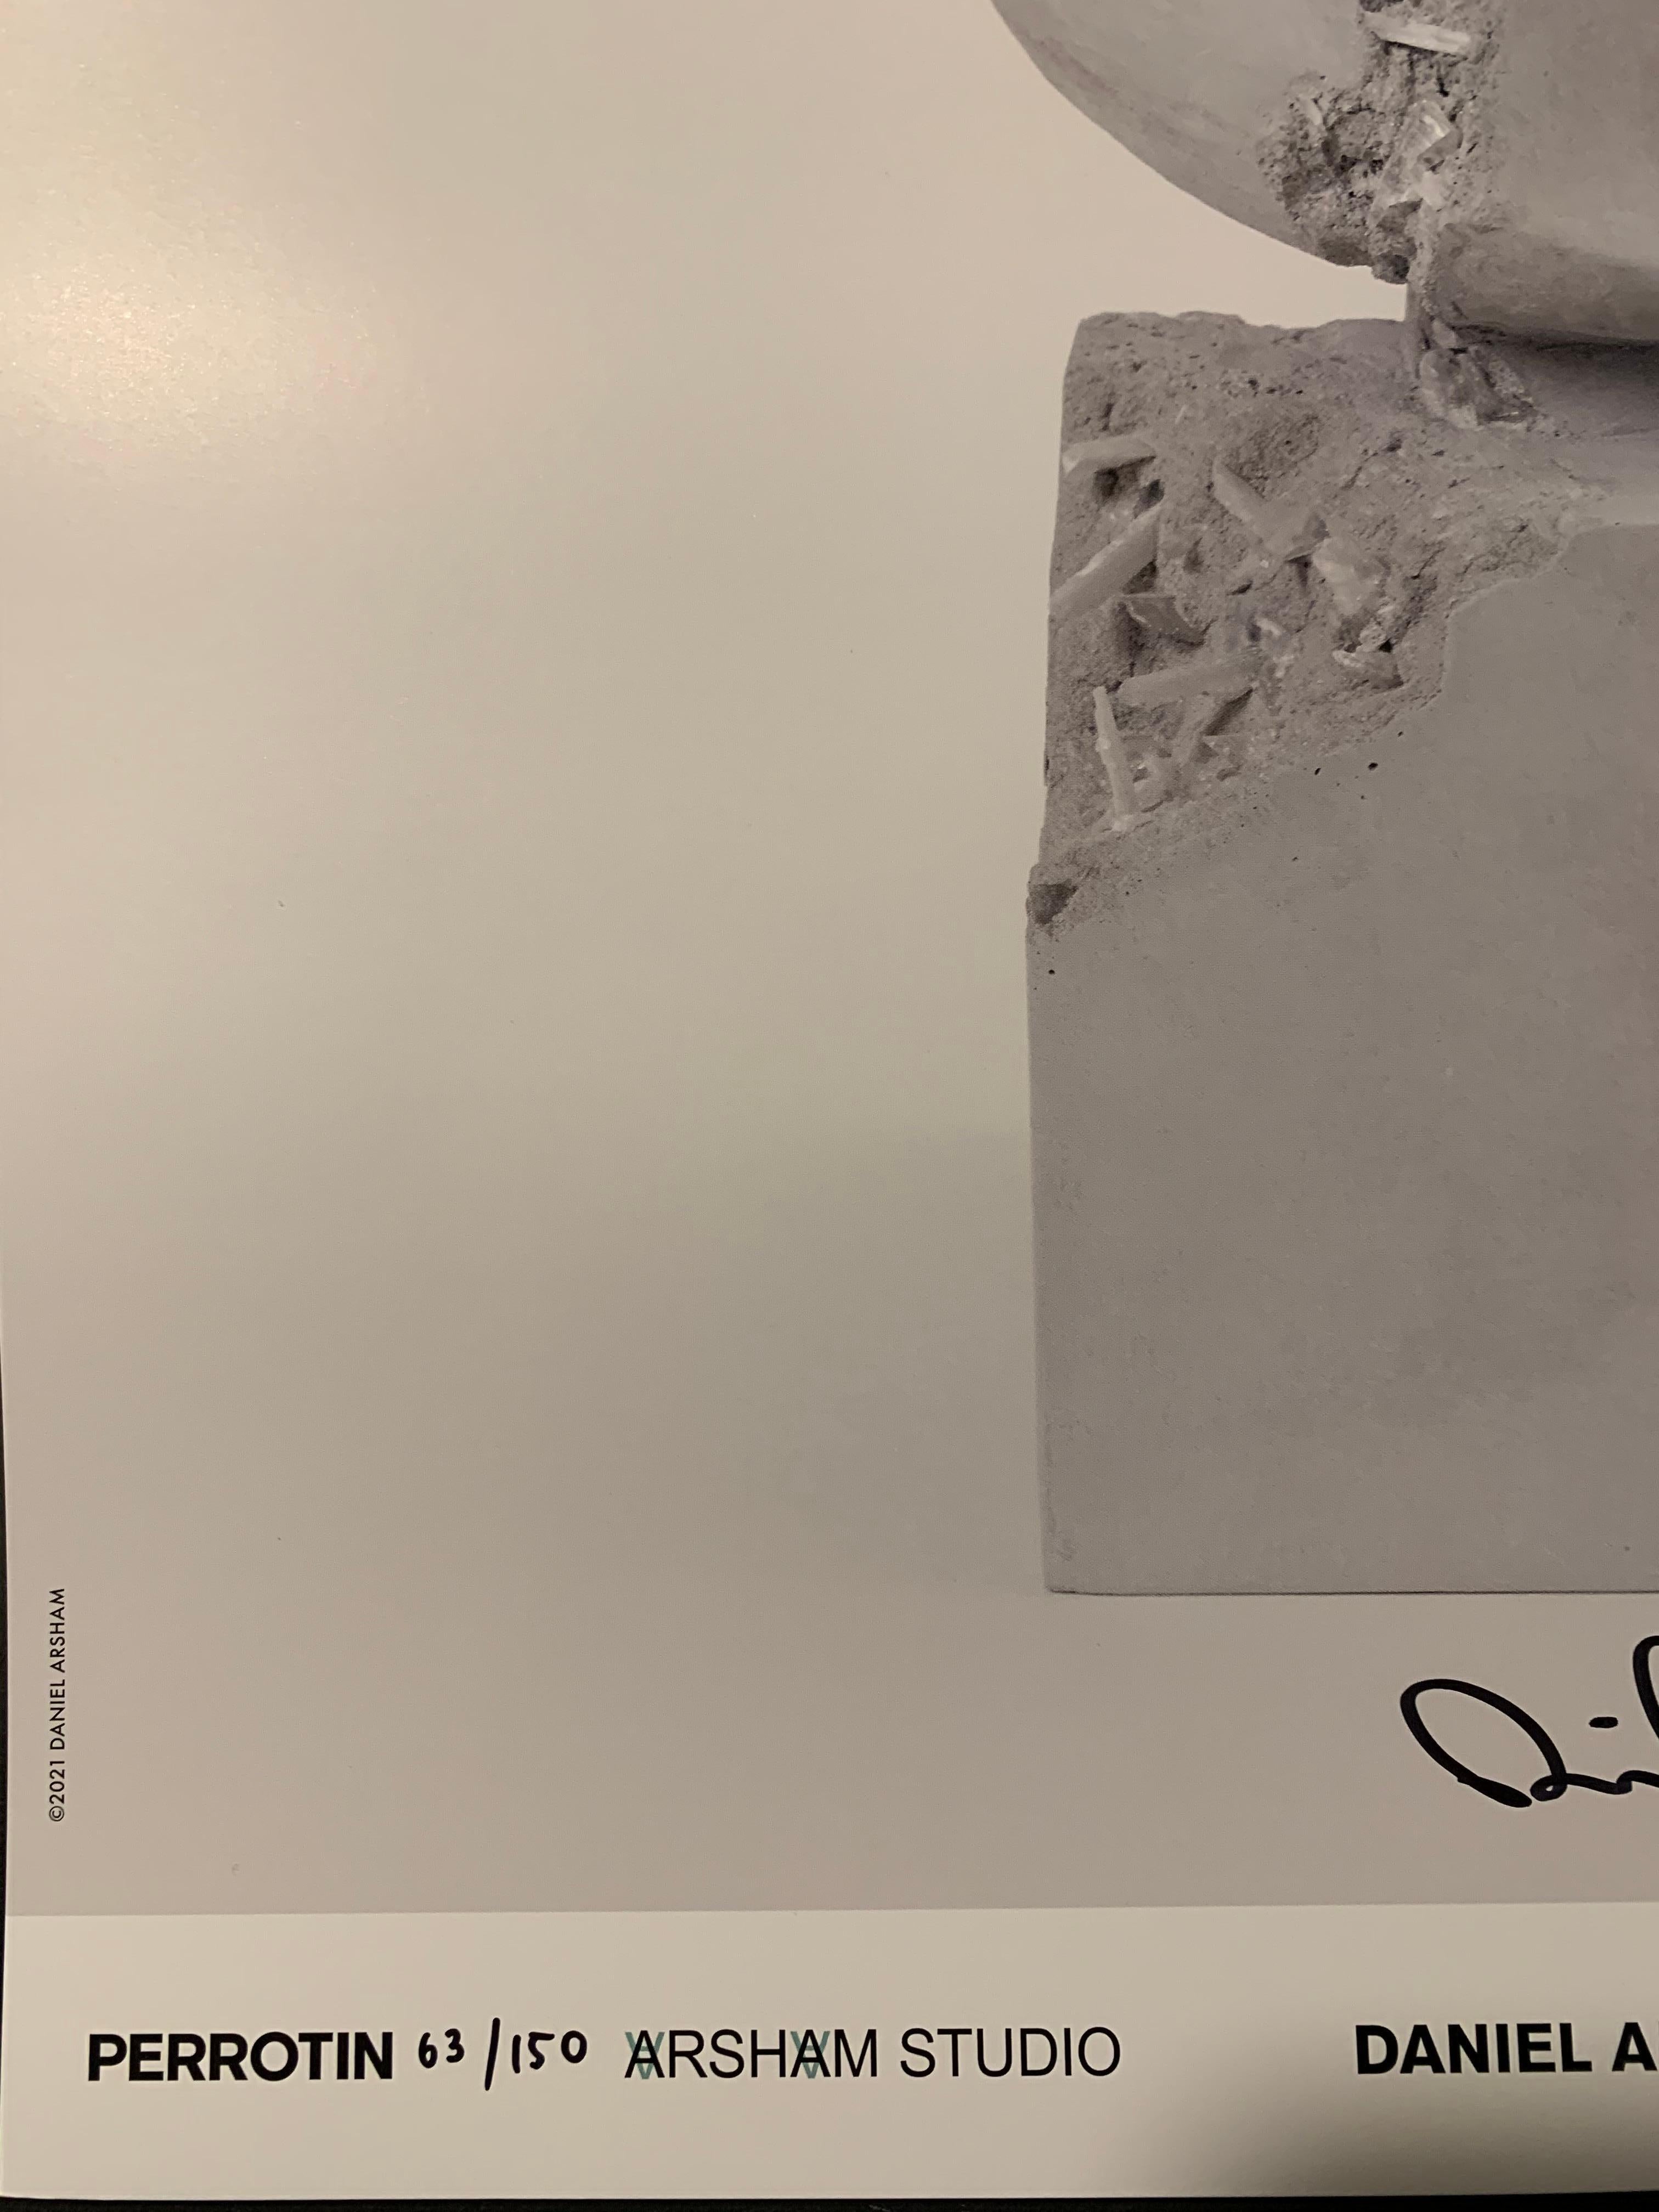 Signed and numbered by the artist in Black Sharpie Pen, Daniel Arsham.  Comes from a very small edition of only 150.